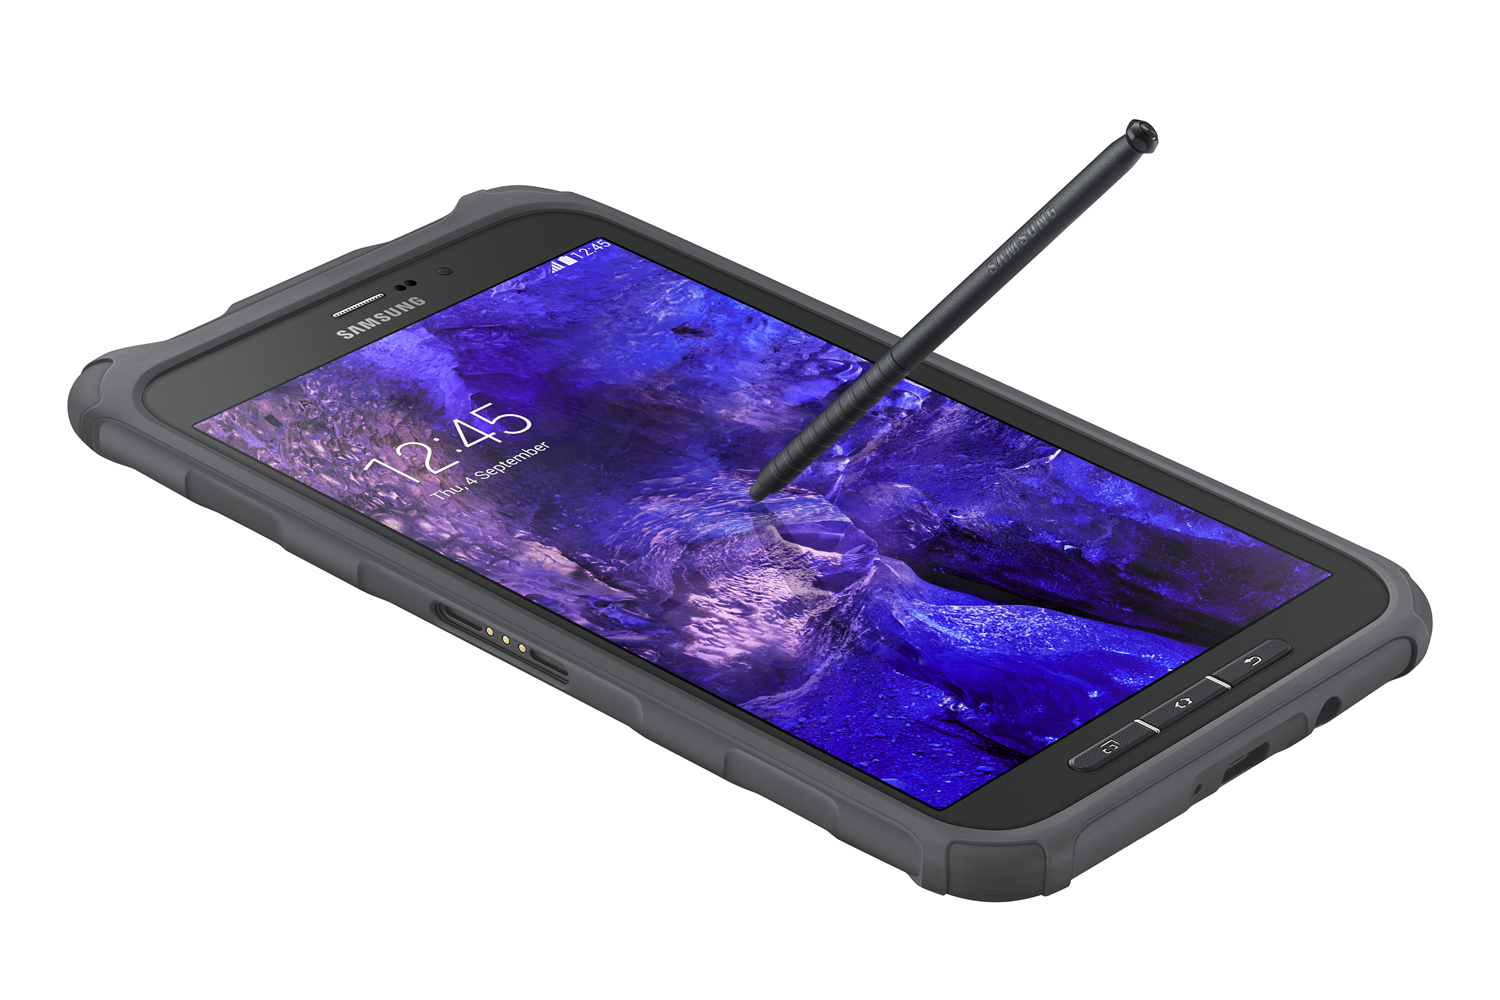 Samsung is working on a new secure tablet Galaxy Tab Active 2